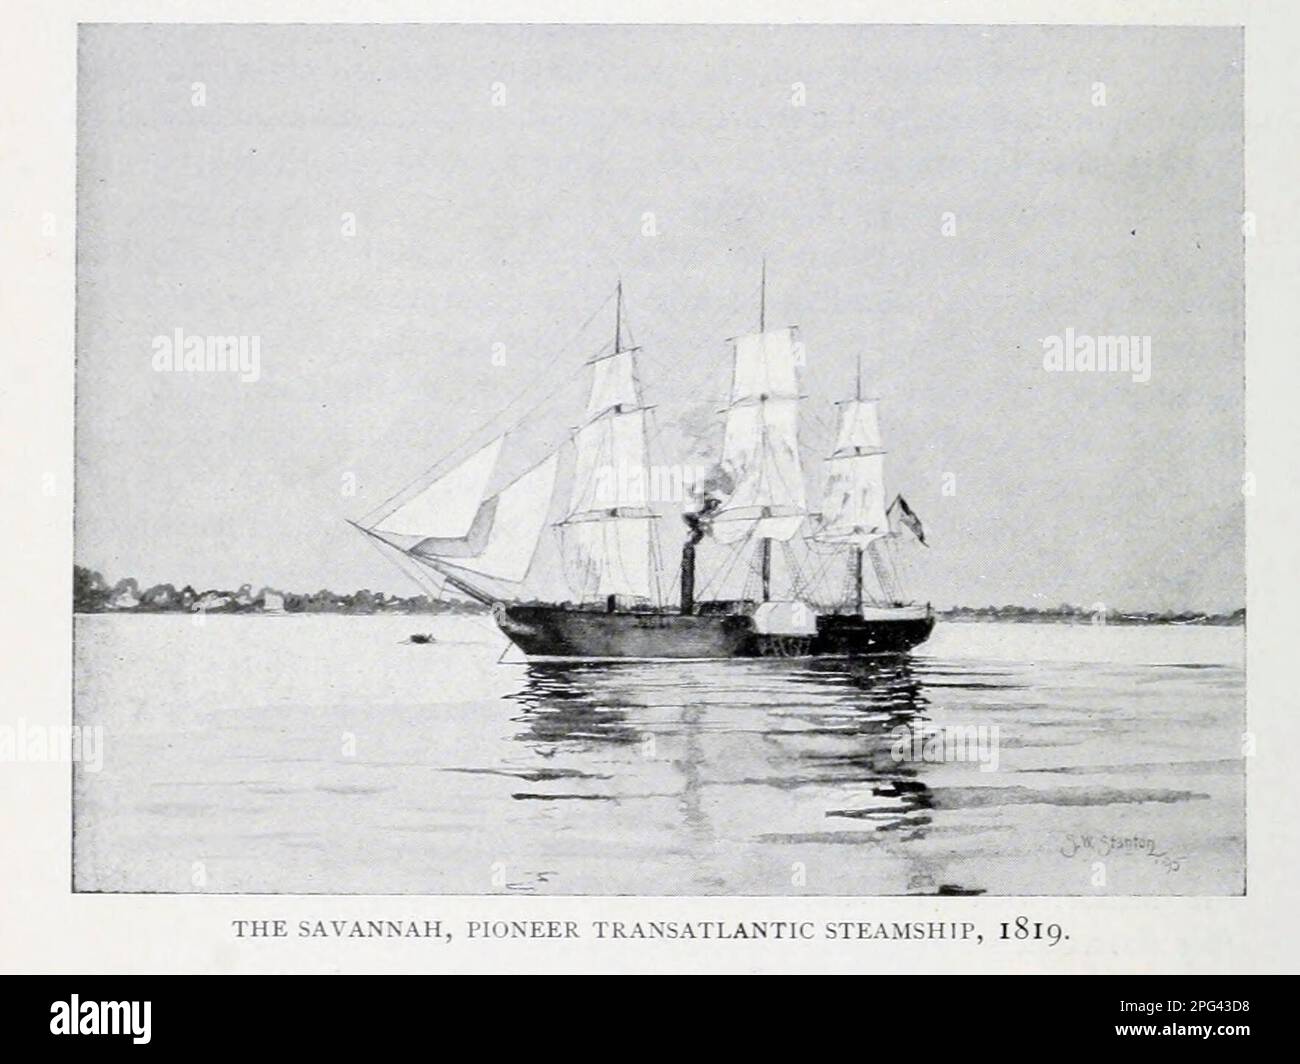 THE SAVANNAH, PIONEER TRANSATLANTIC STEAMSHIP, I8I9 from the Article THE EARLIEST TRANSATLANTIC STEAMSHIPS. 1819-1855. By Samuel Ward Stanton from The Engineering Magazine DEVOTED TO INDUSTRIAL PROGRESS Volume IX April to September, 1895 NEW YORK The Engineering Magazine Co Stock Photo